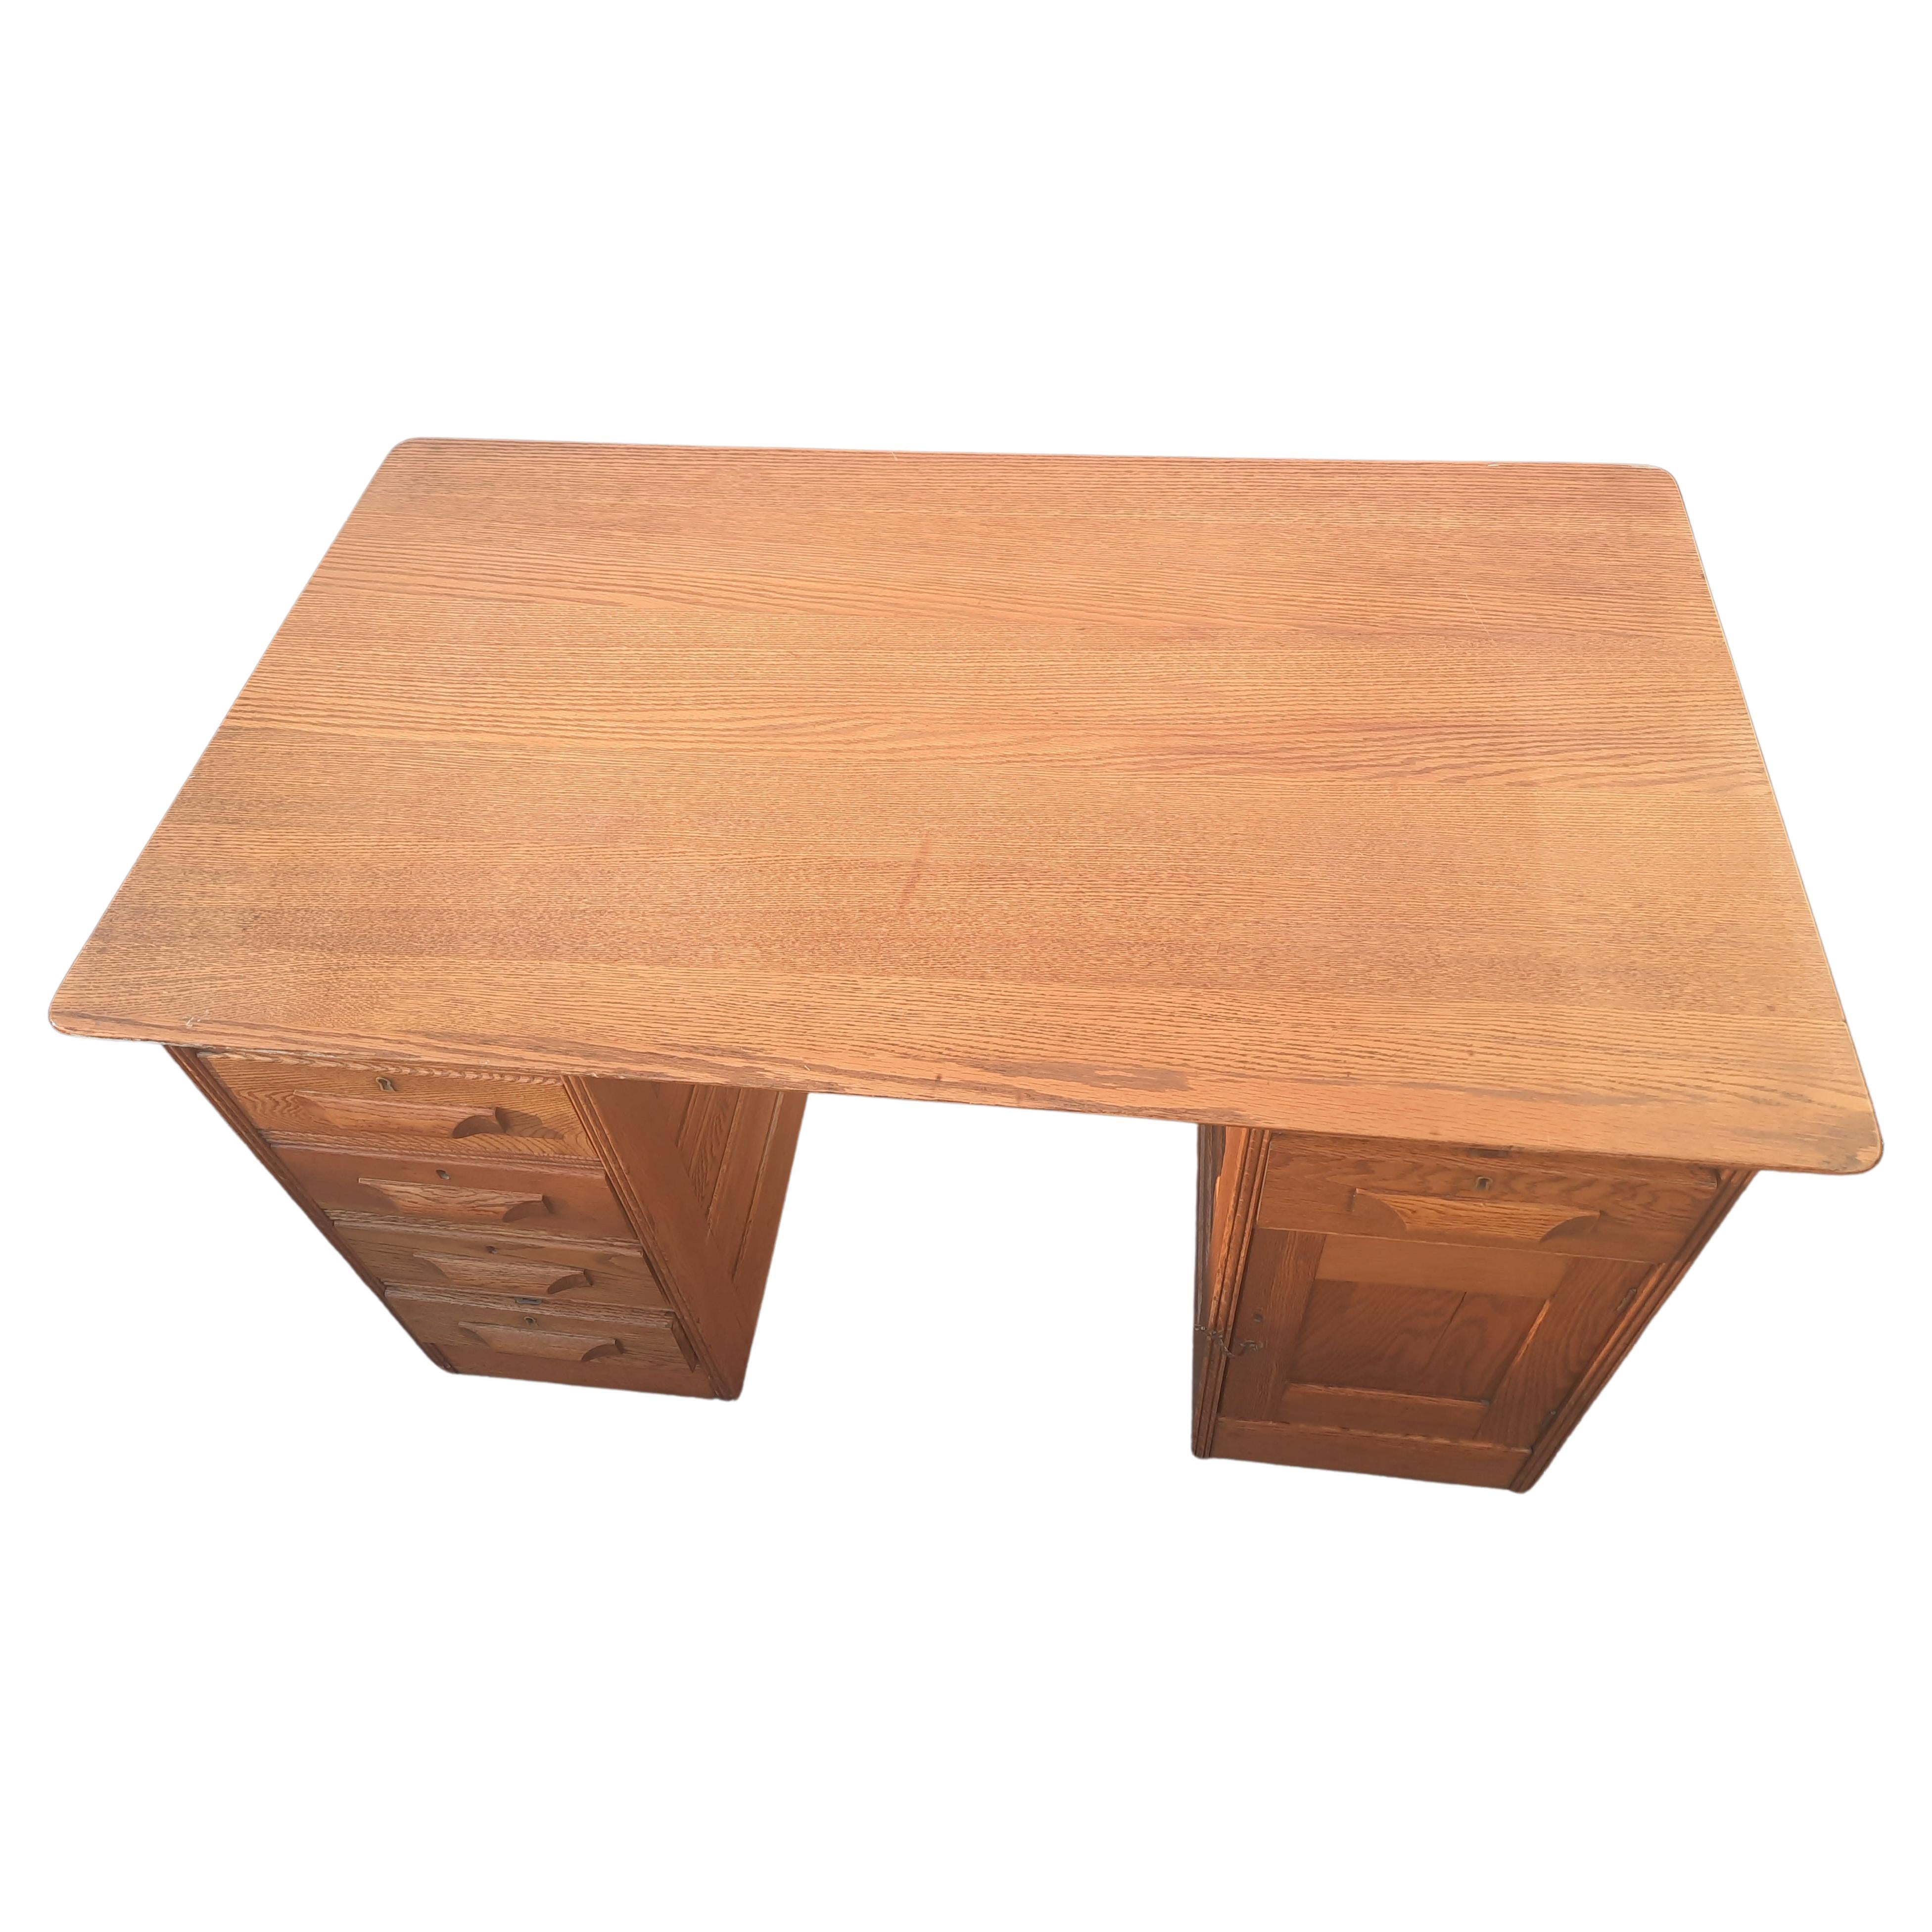 20th Century Handcrafted Solid Oak Partners Desk Writing Desk on Wheels, circa 1960 For Sale